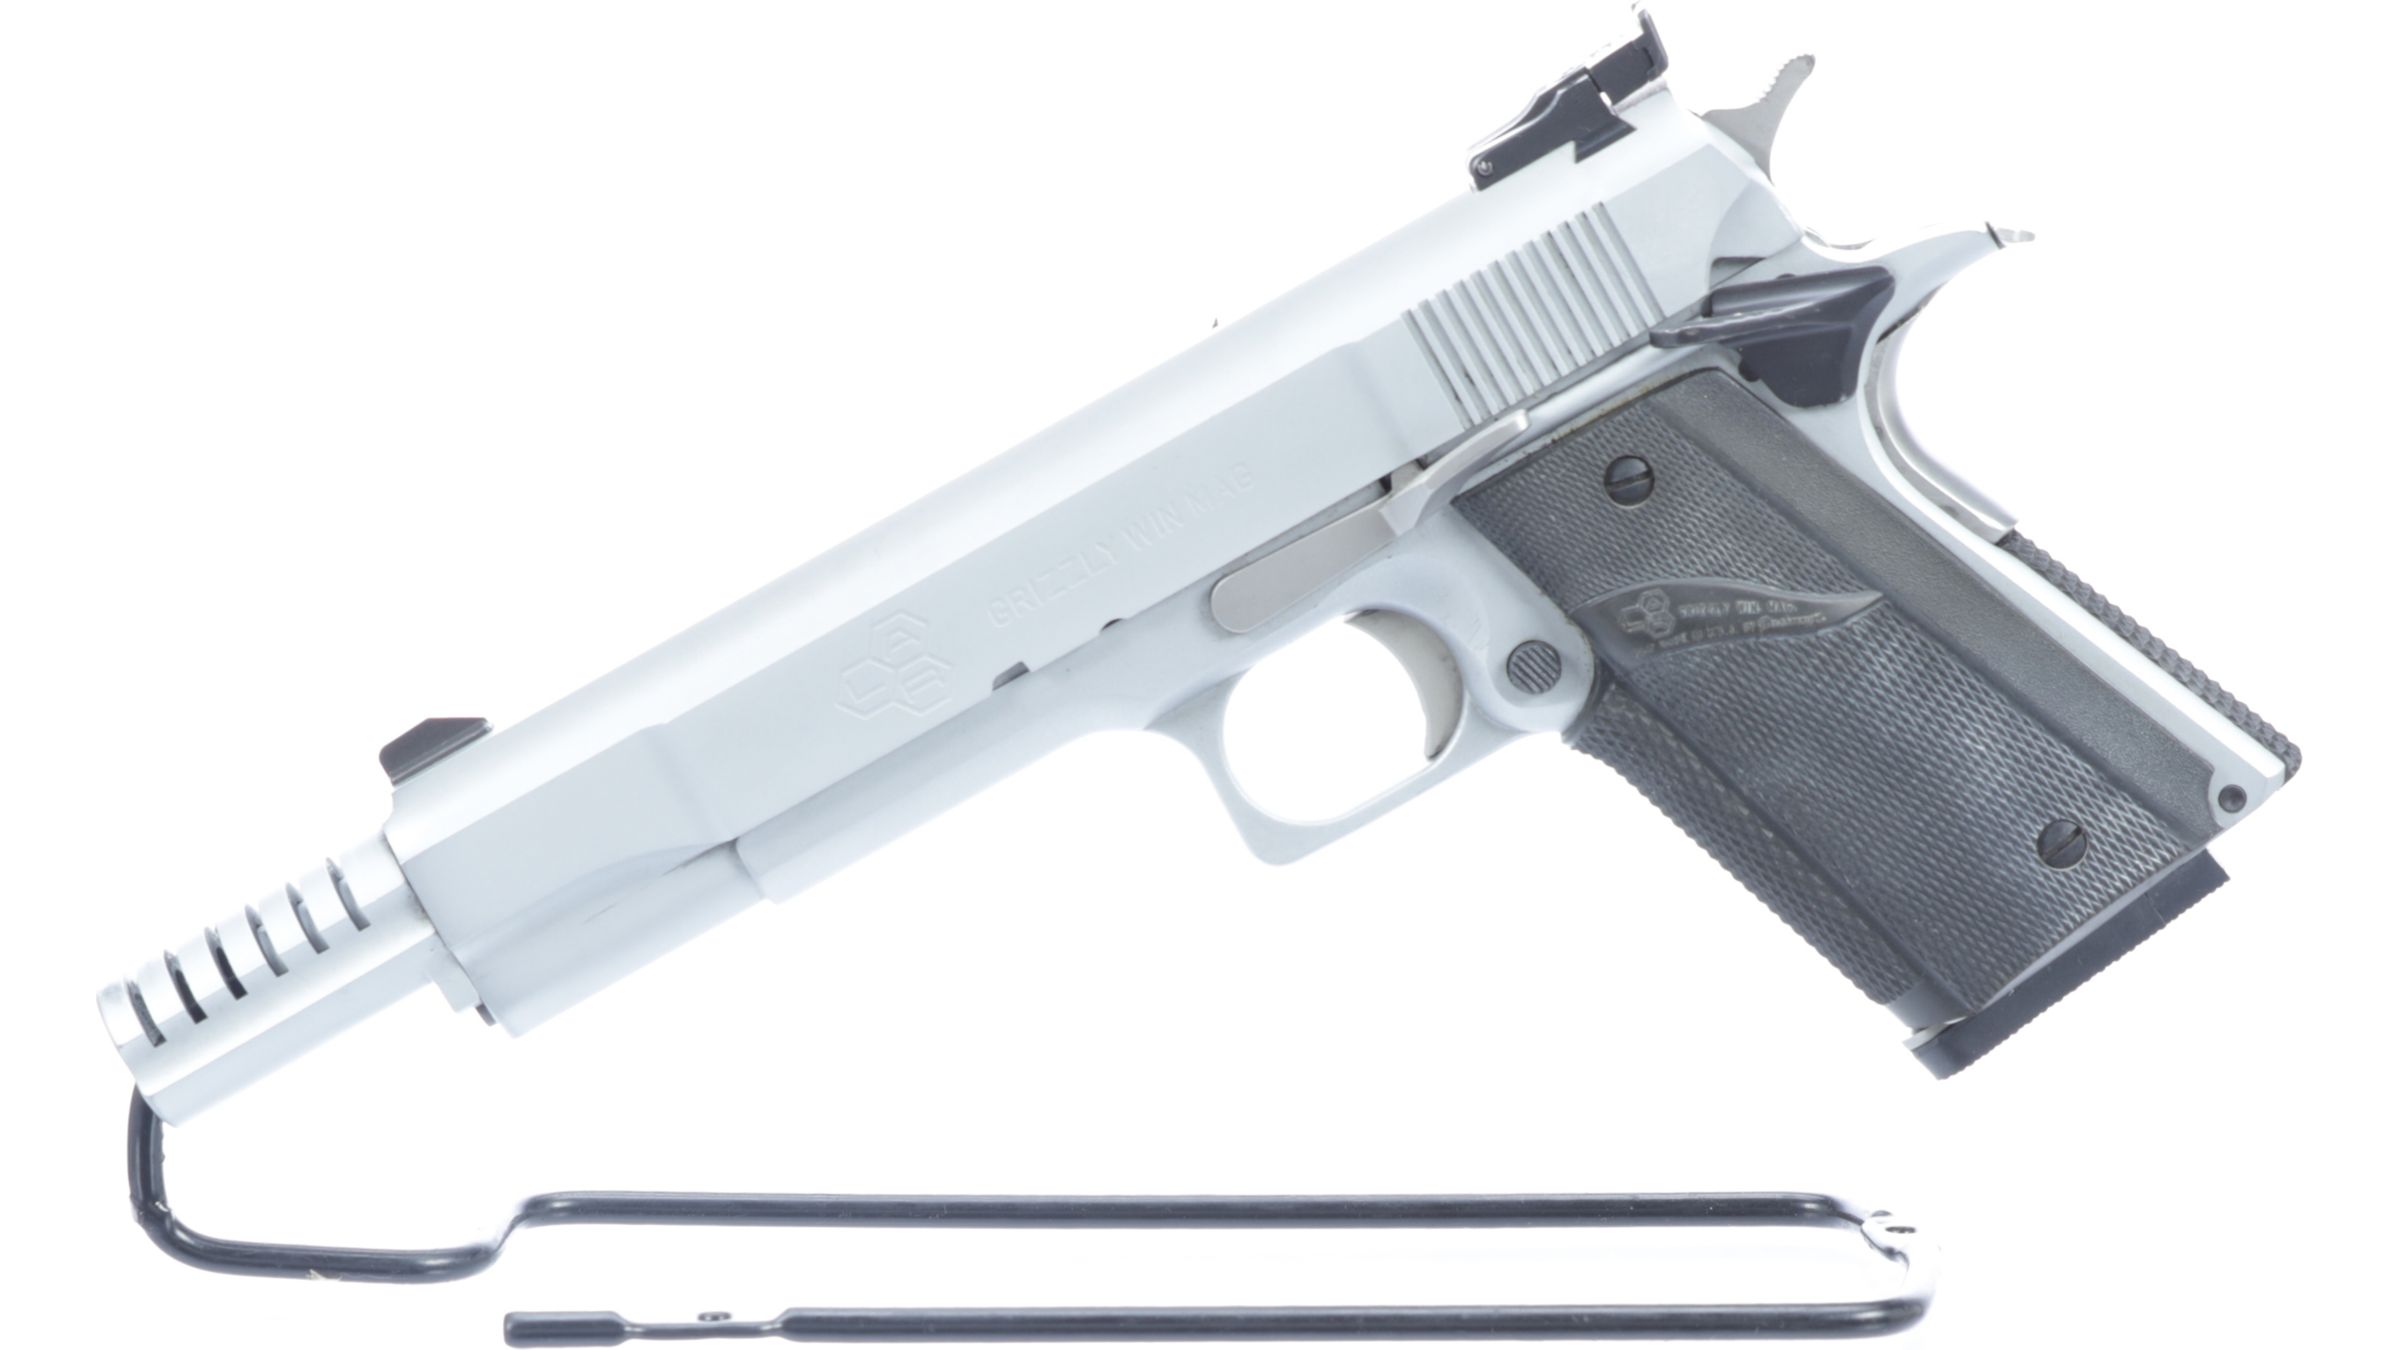 LAR Manufacturing Grizzly Win Mag Mark I Semi-Automatic Pistol | Rock